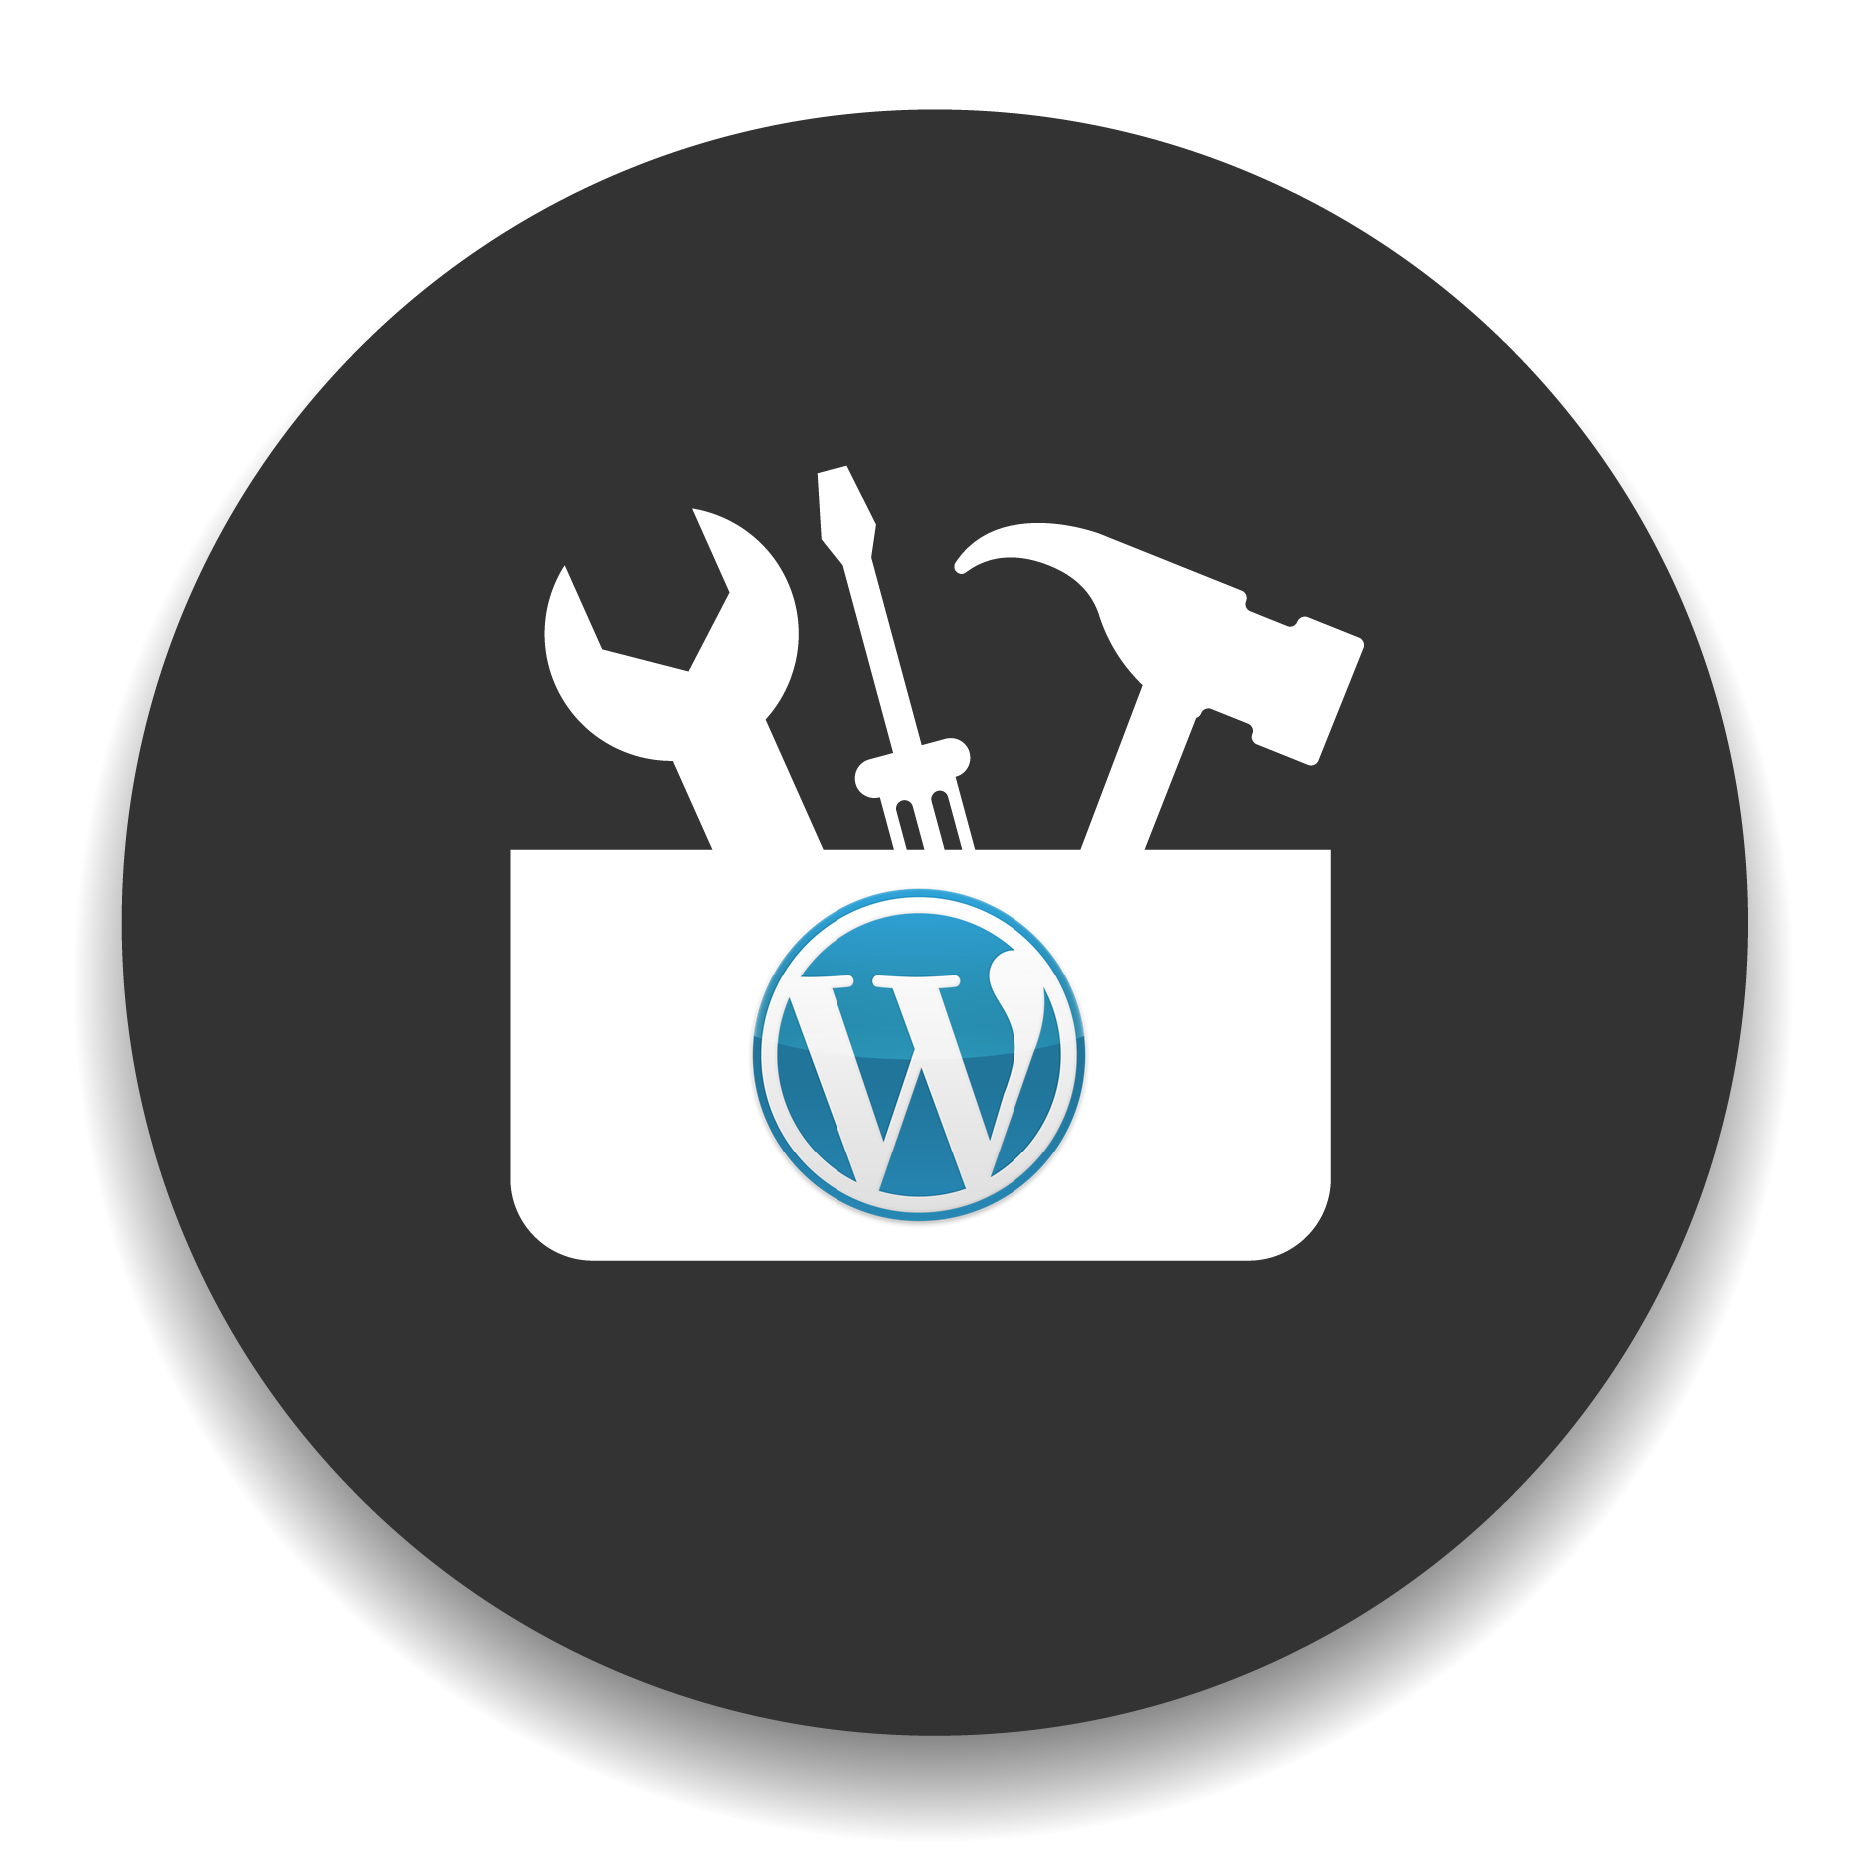 WordPress – The right tool for your website